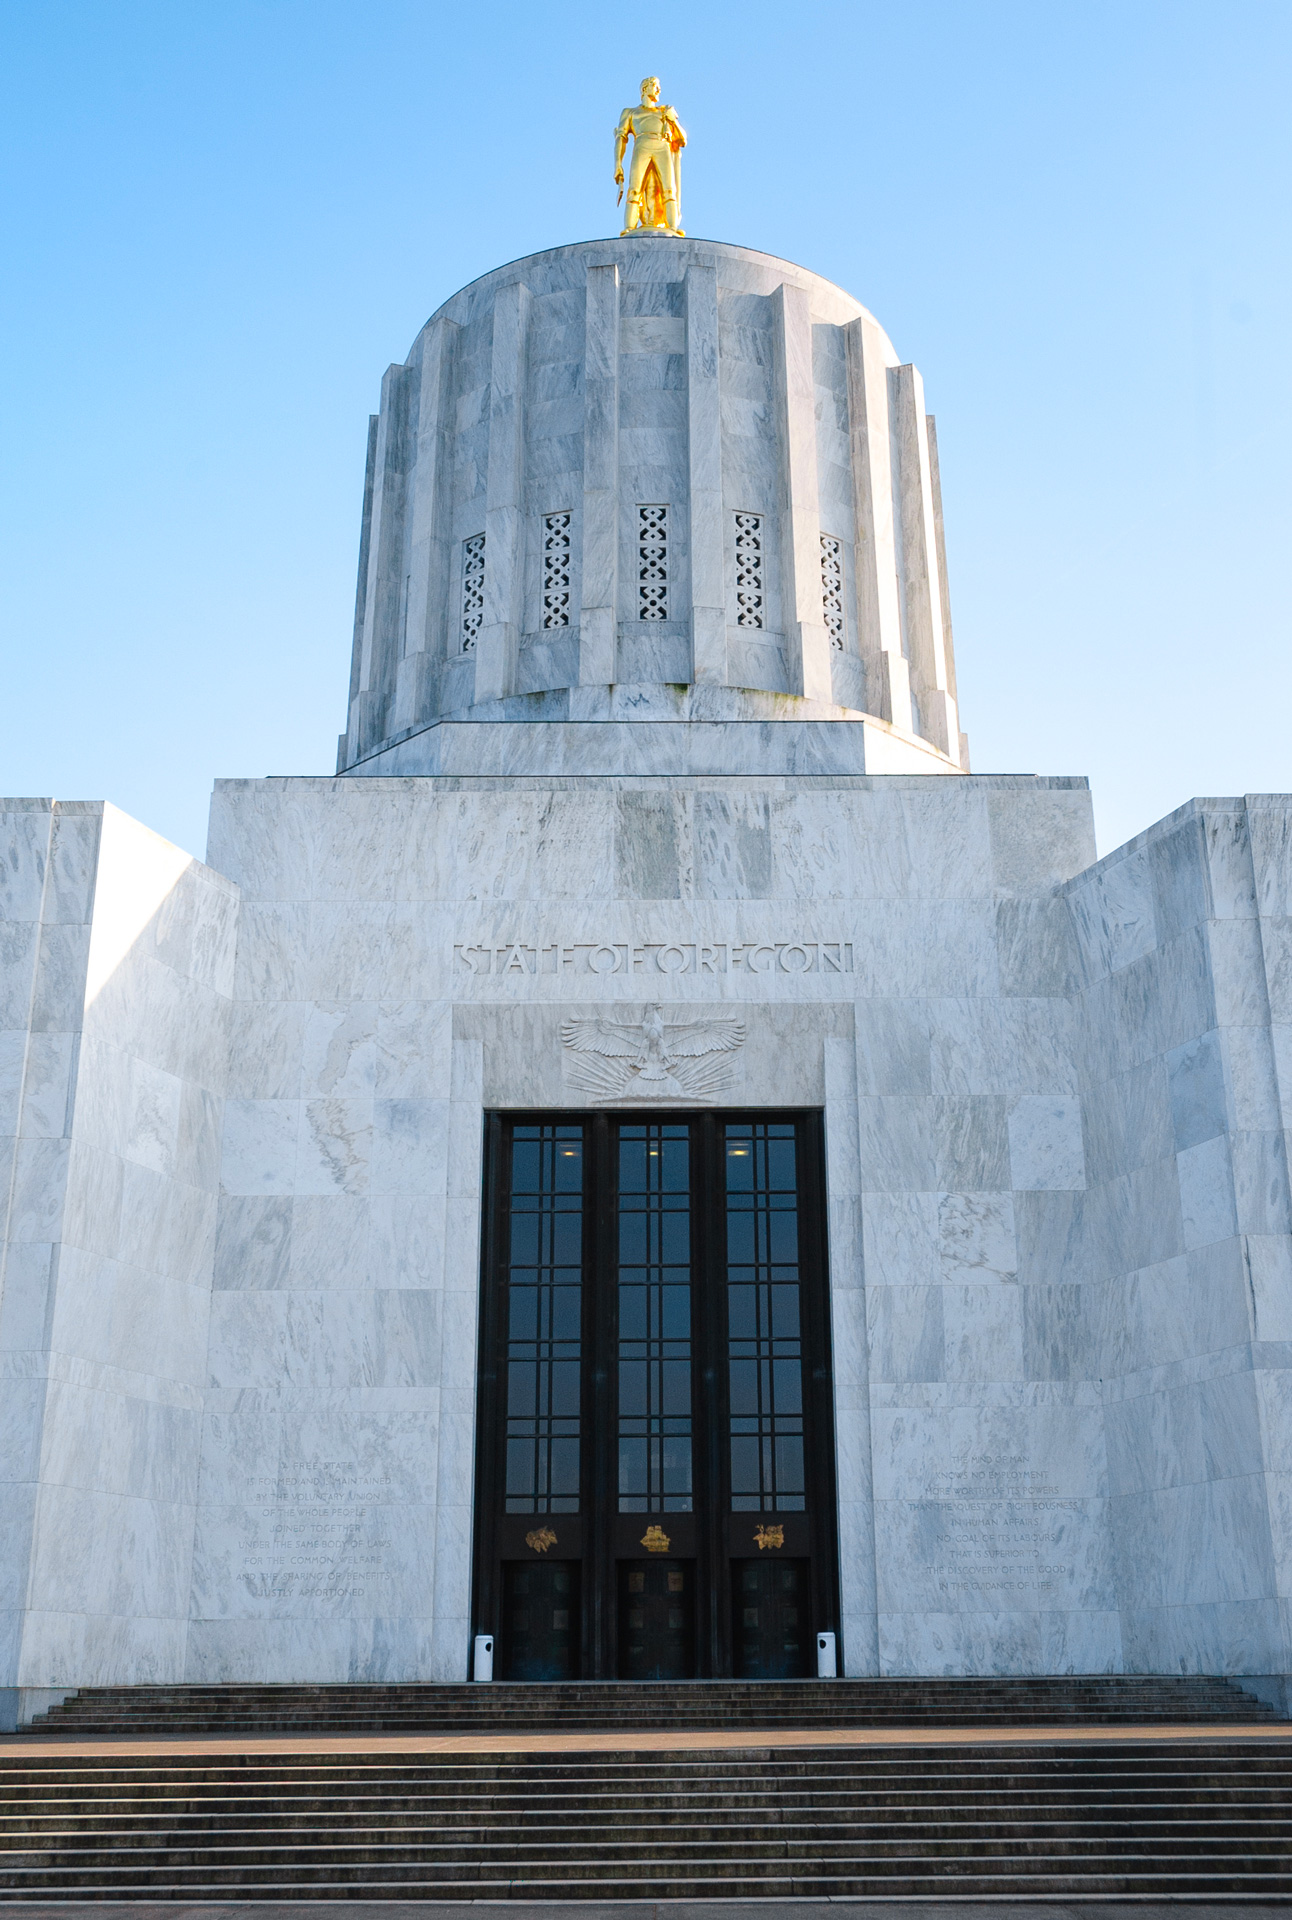  Capitol of the State of Oregon in the United States